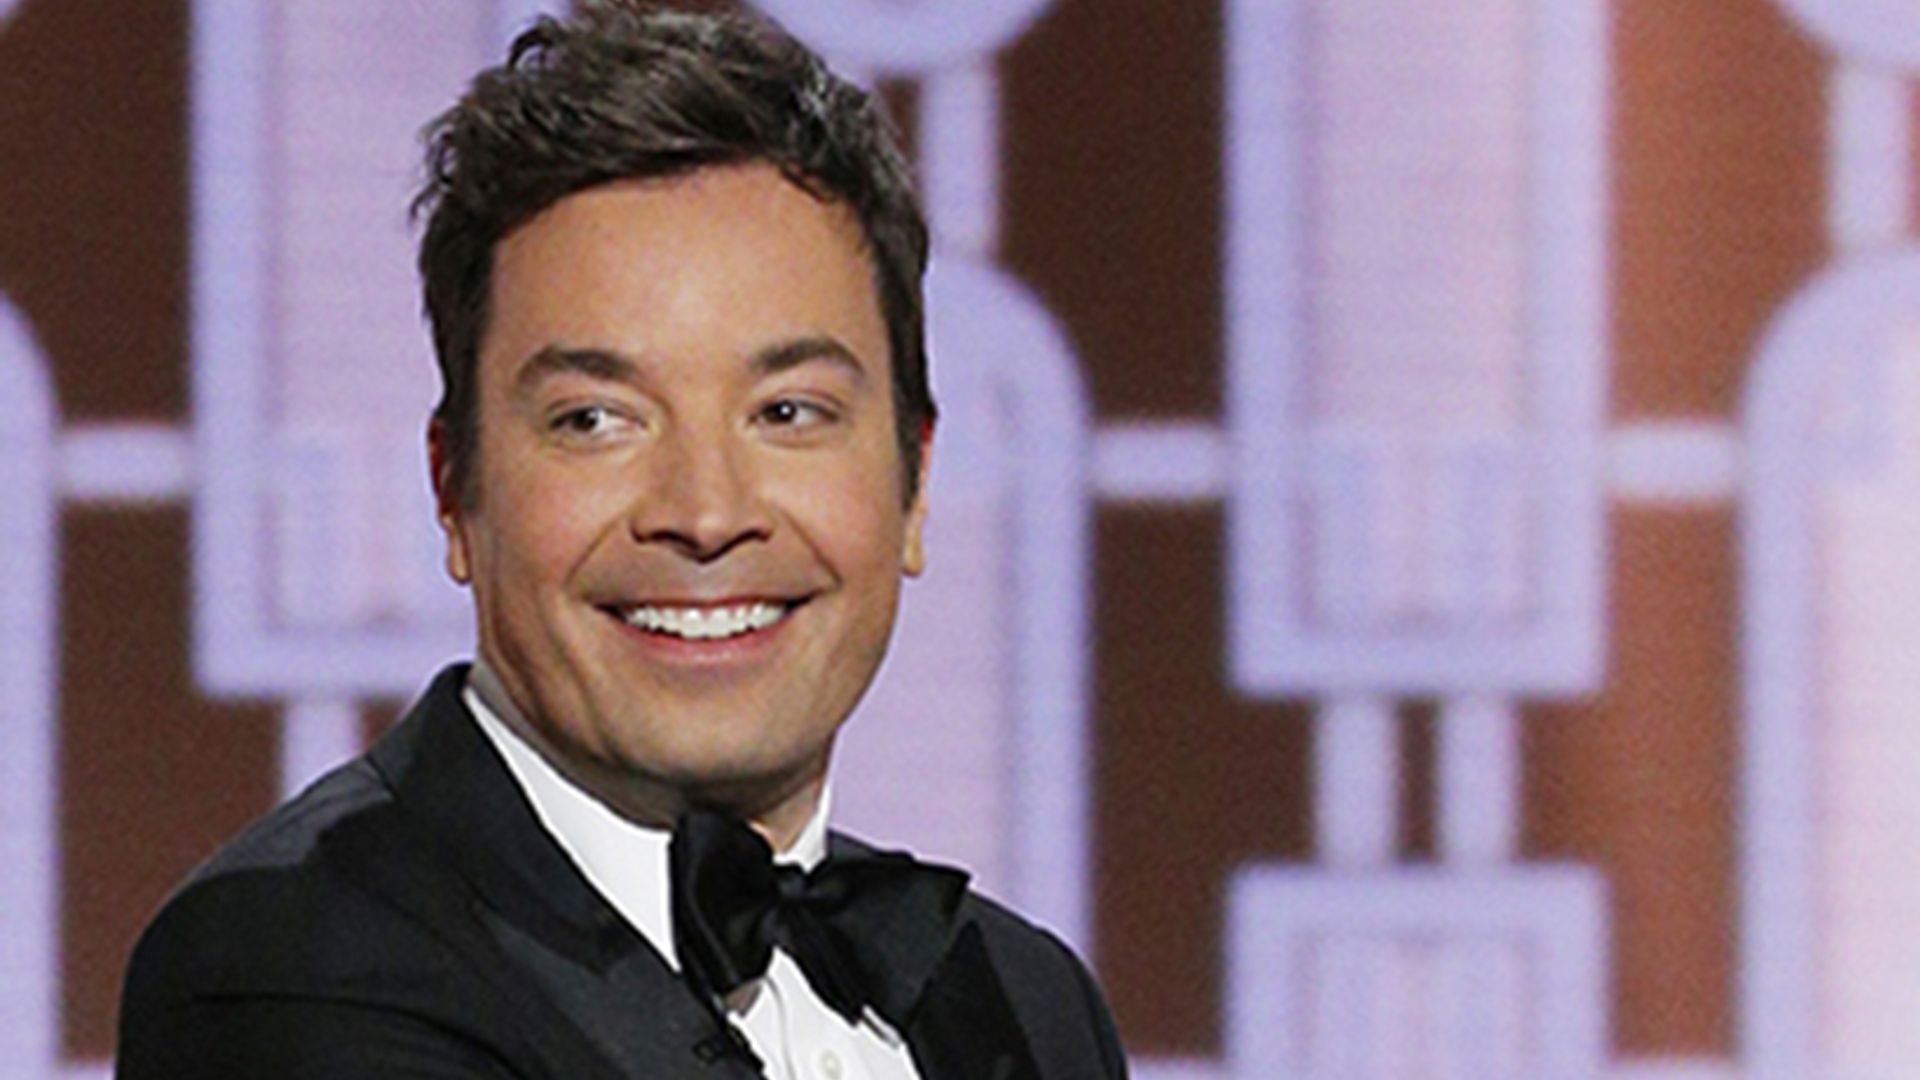 The most LOL-moments from Jimmy Fallon's Golden Globes monologue